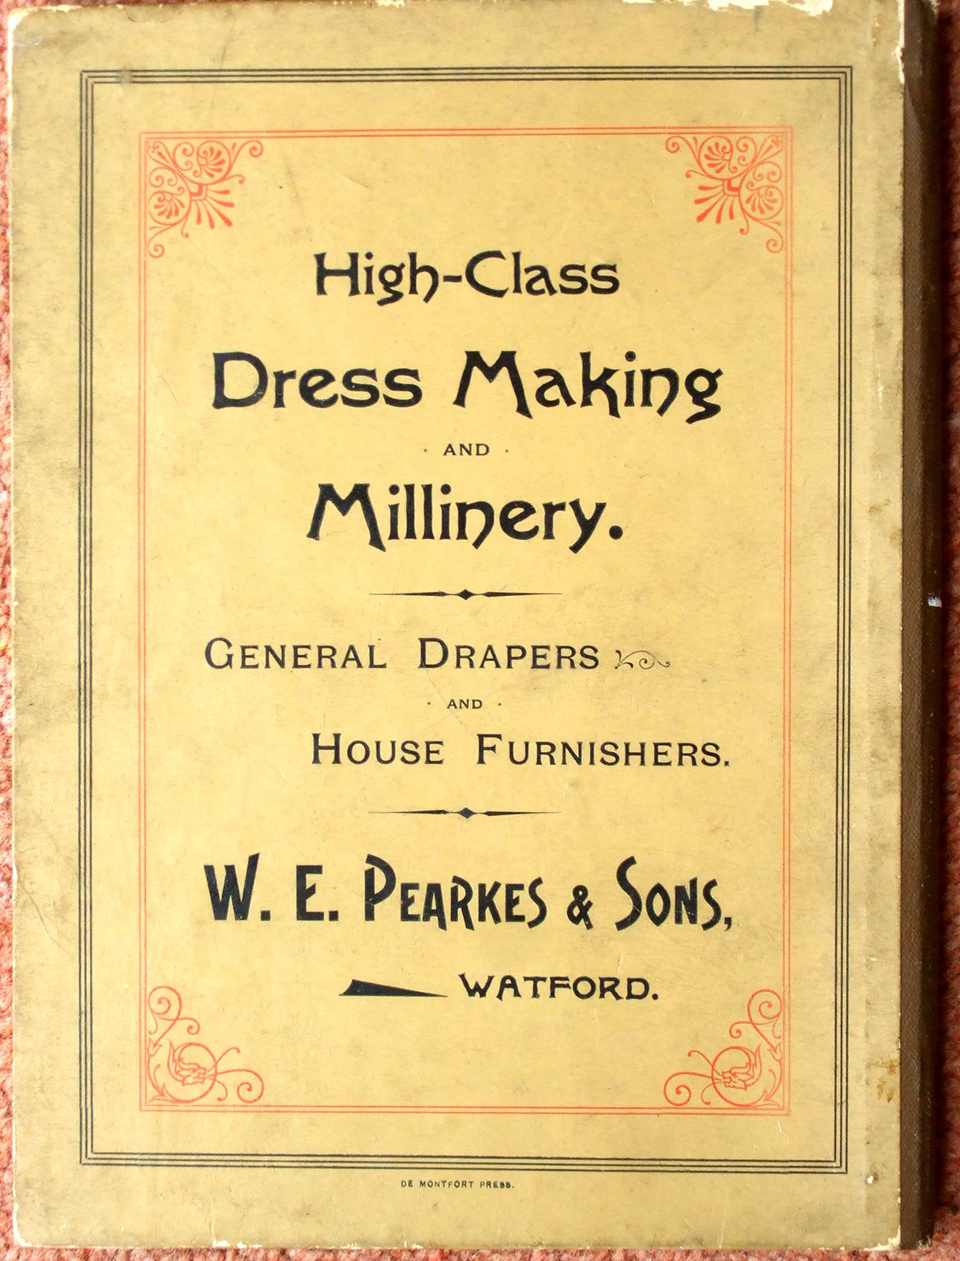 A Pearkes advert on the back cover